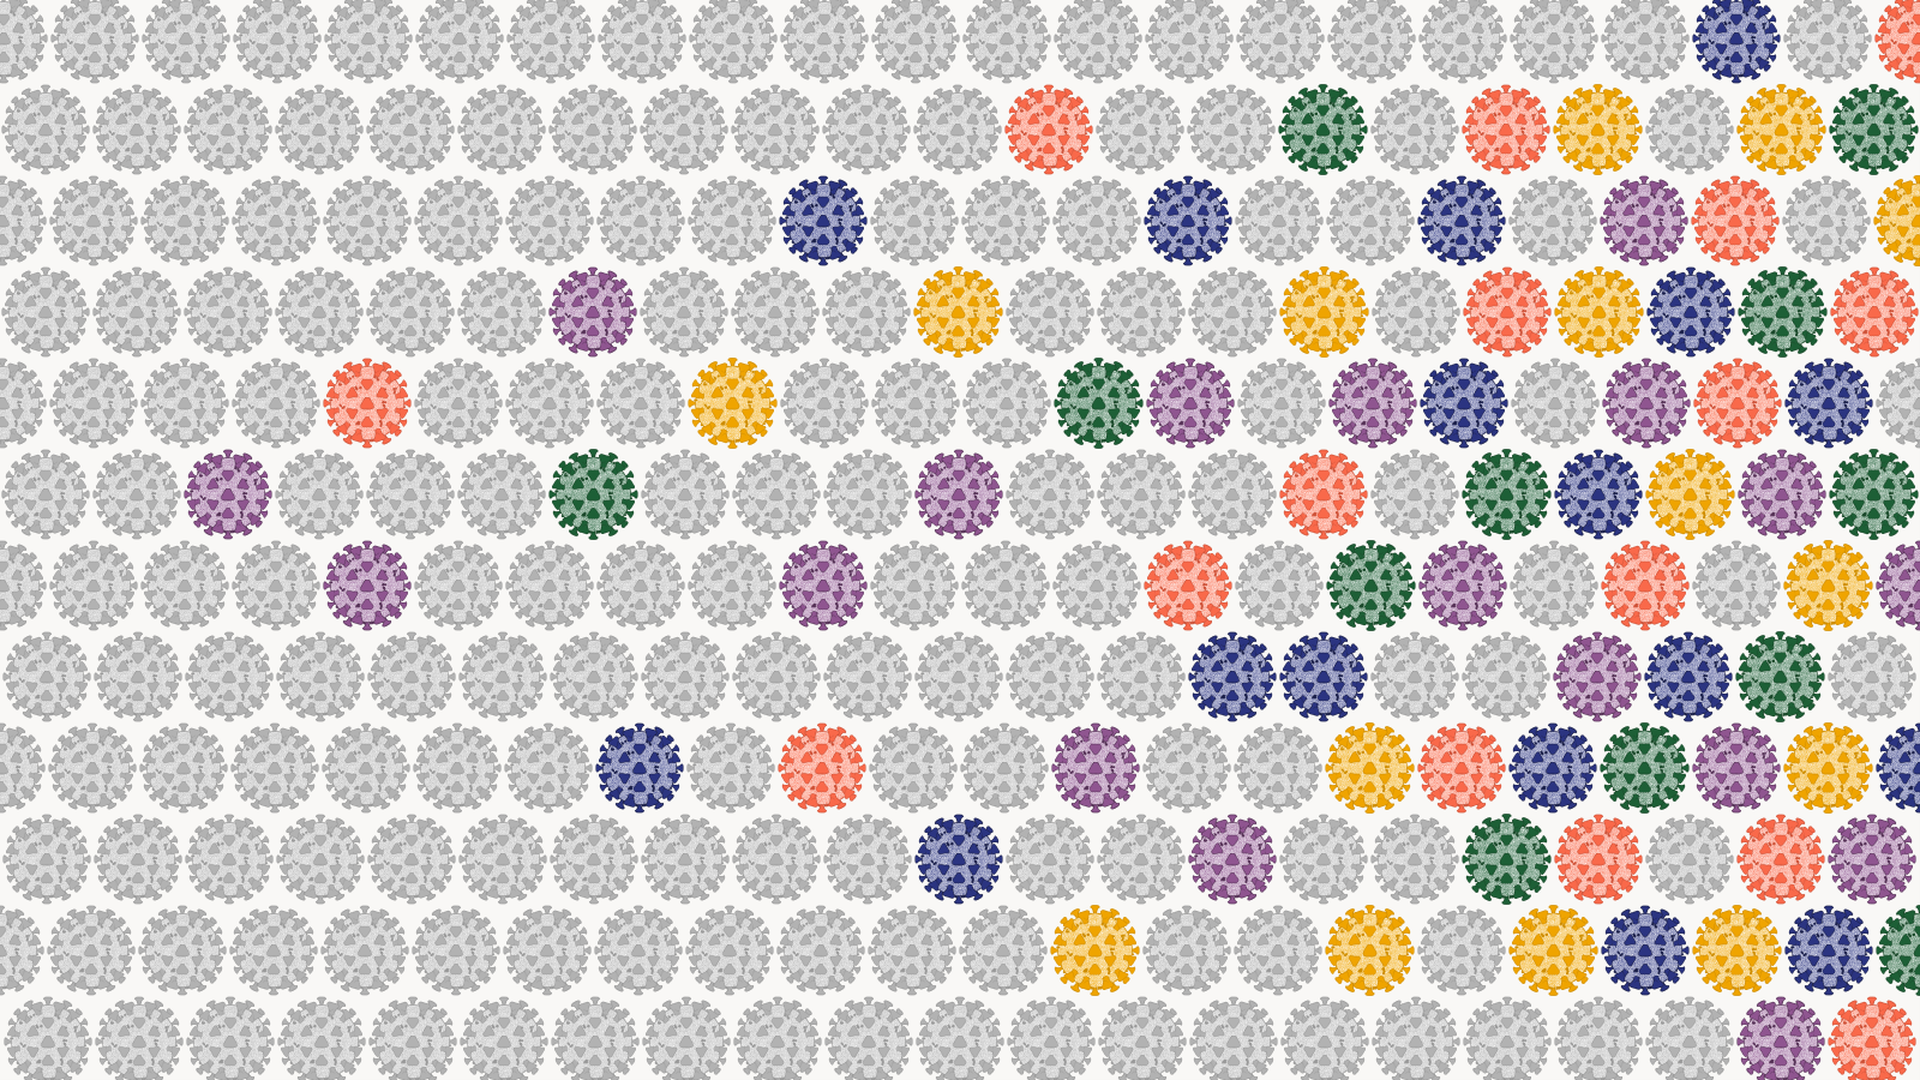 A grid of viruses changing from grey to colored